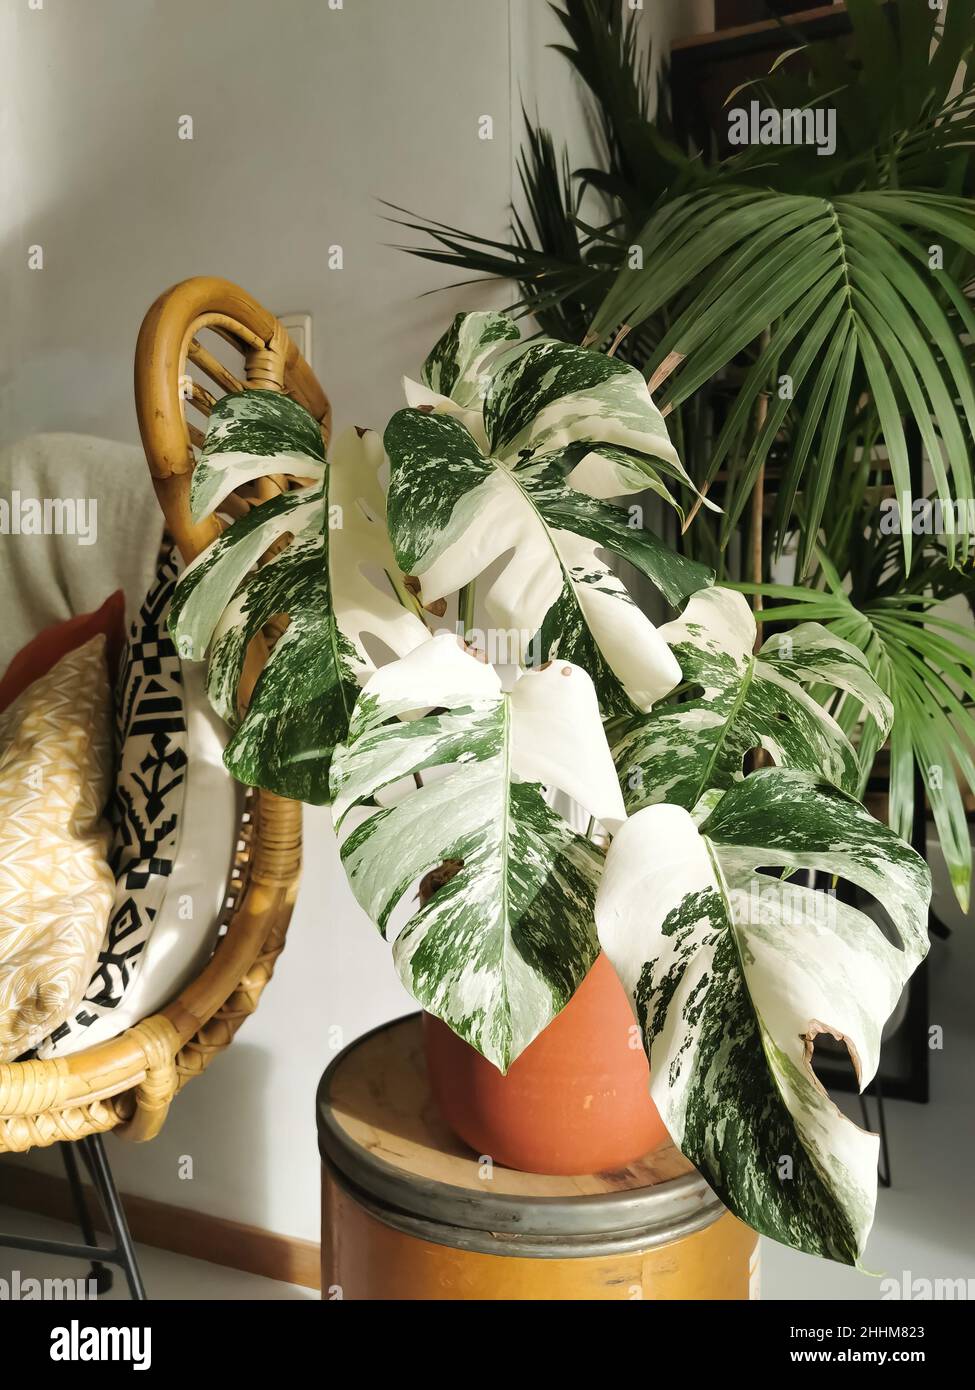 Monstera albo borsigiana or variegated monstera houseplant. Highly  variegated full plant in an urban jungle interior. Expensive and rare plant  Stock Photo - Alamy